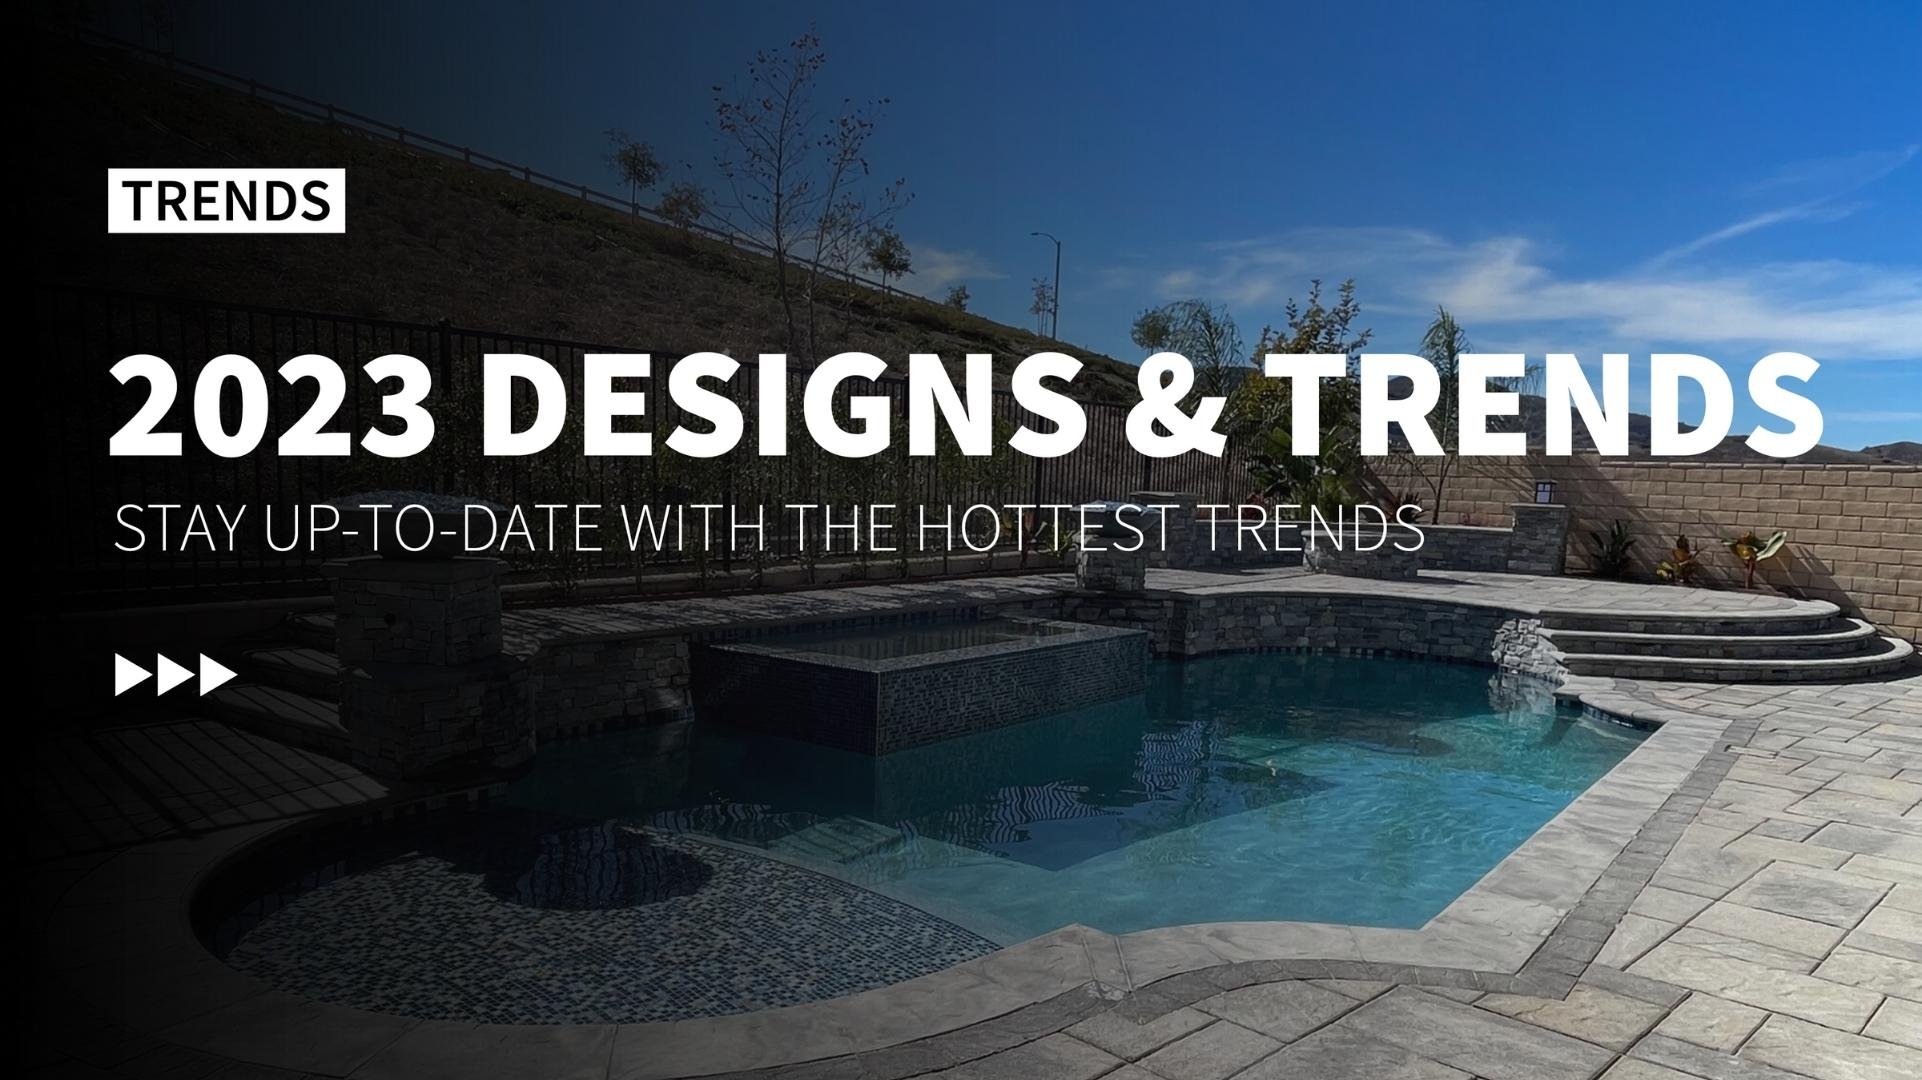 Cover photo showing a pool title 2023 designs and trends